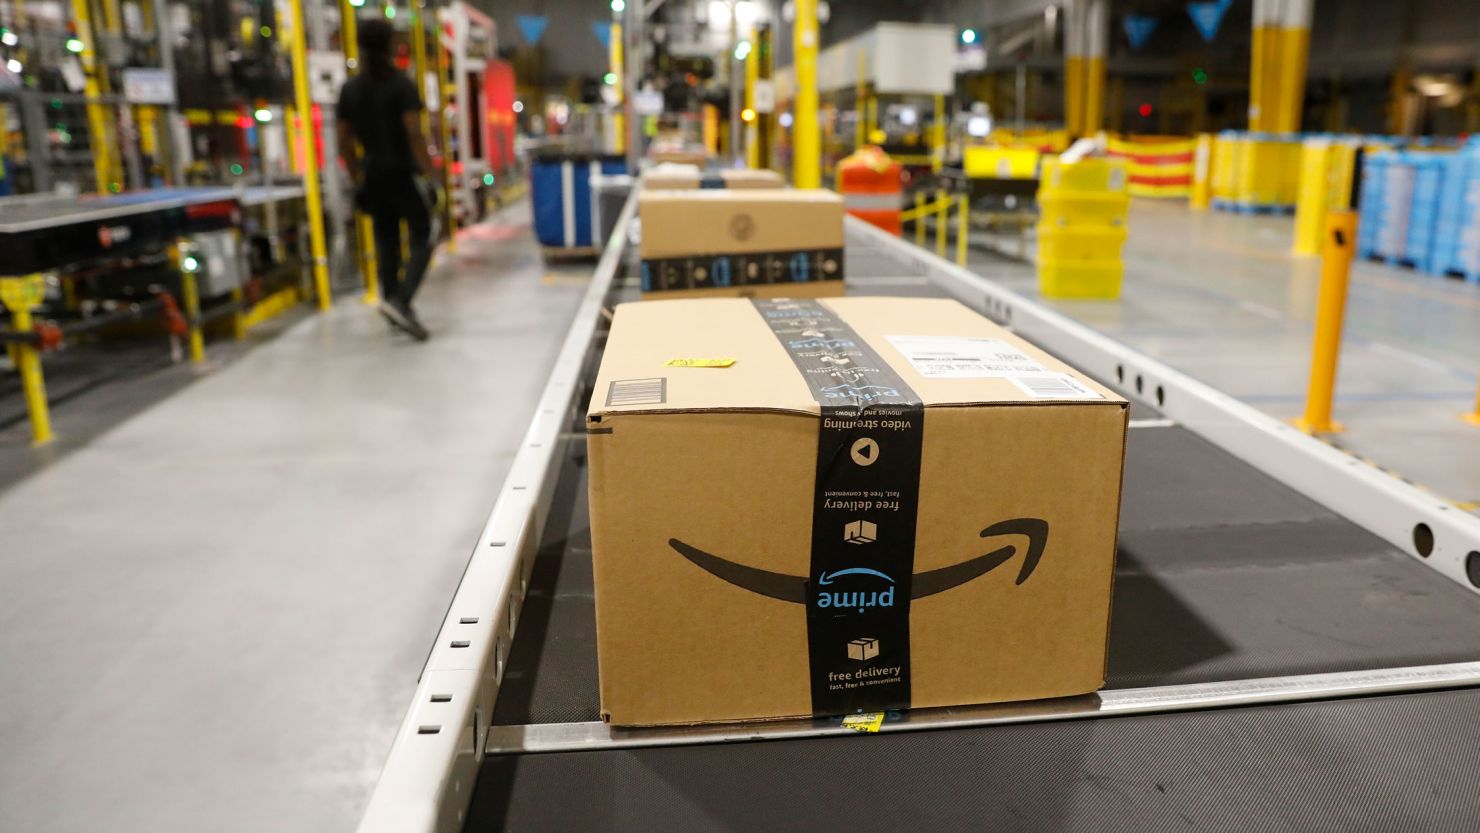 S&P Dow Jones Indices, which manages the Dow Jones Industrial Average, said it added Amazon to the index to reflect "the evolving nature of the American economy."